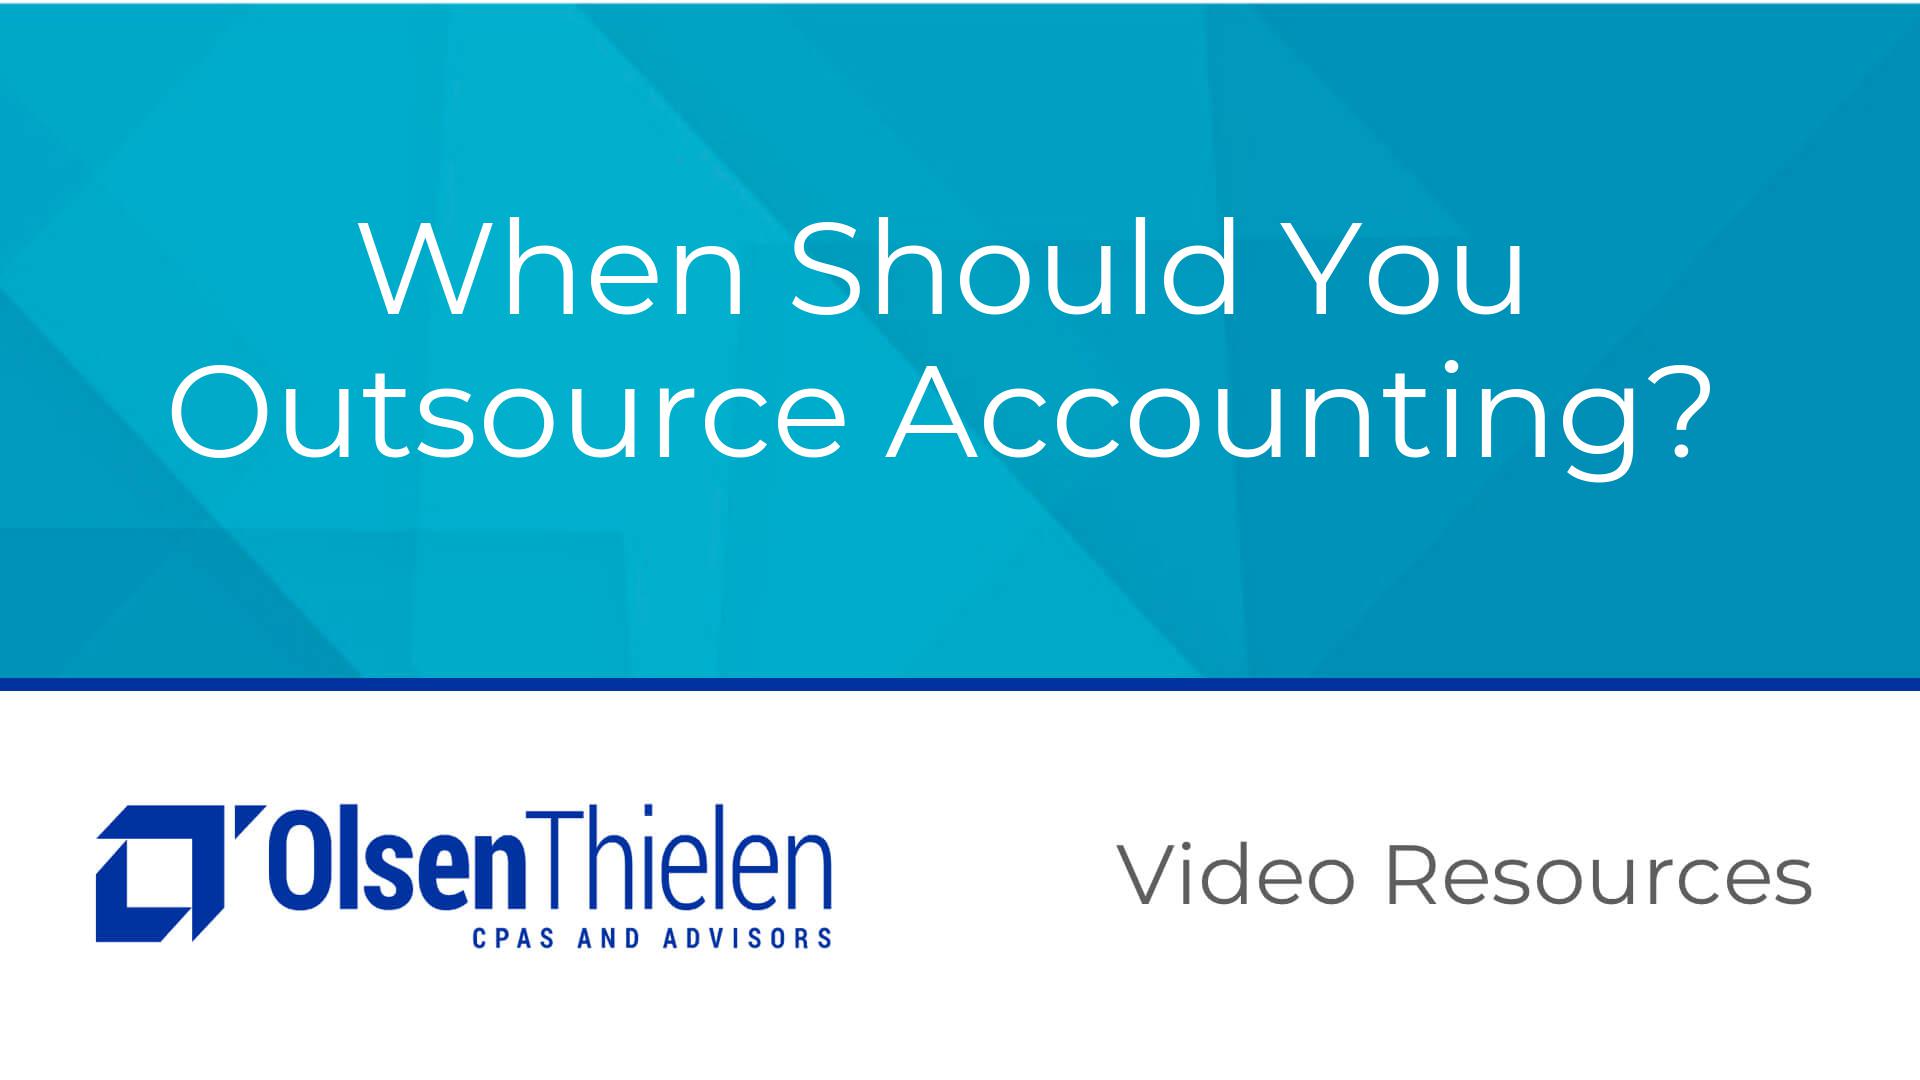 When Should You Outsource Accounting?